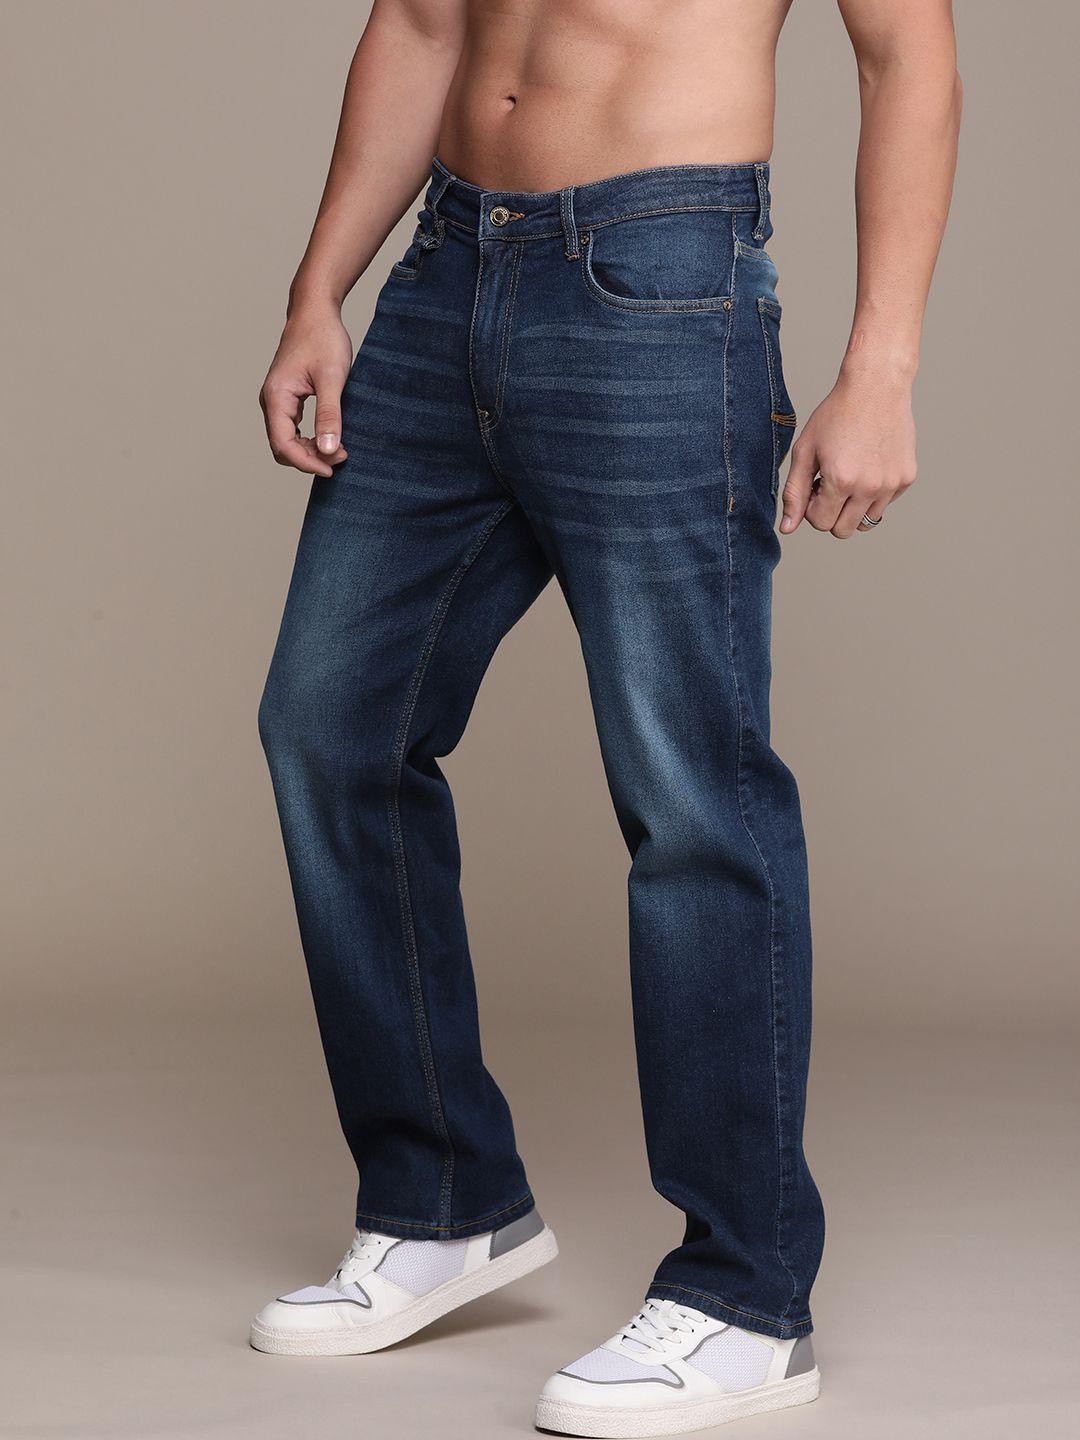 the-roadster-life-co.-men-regular-fit-heavy-fade-stretchable-jeans